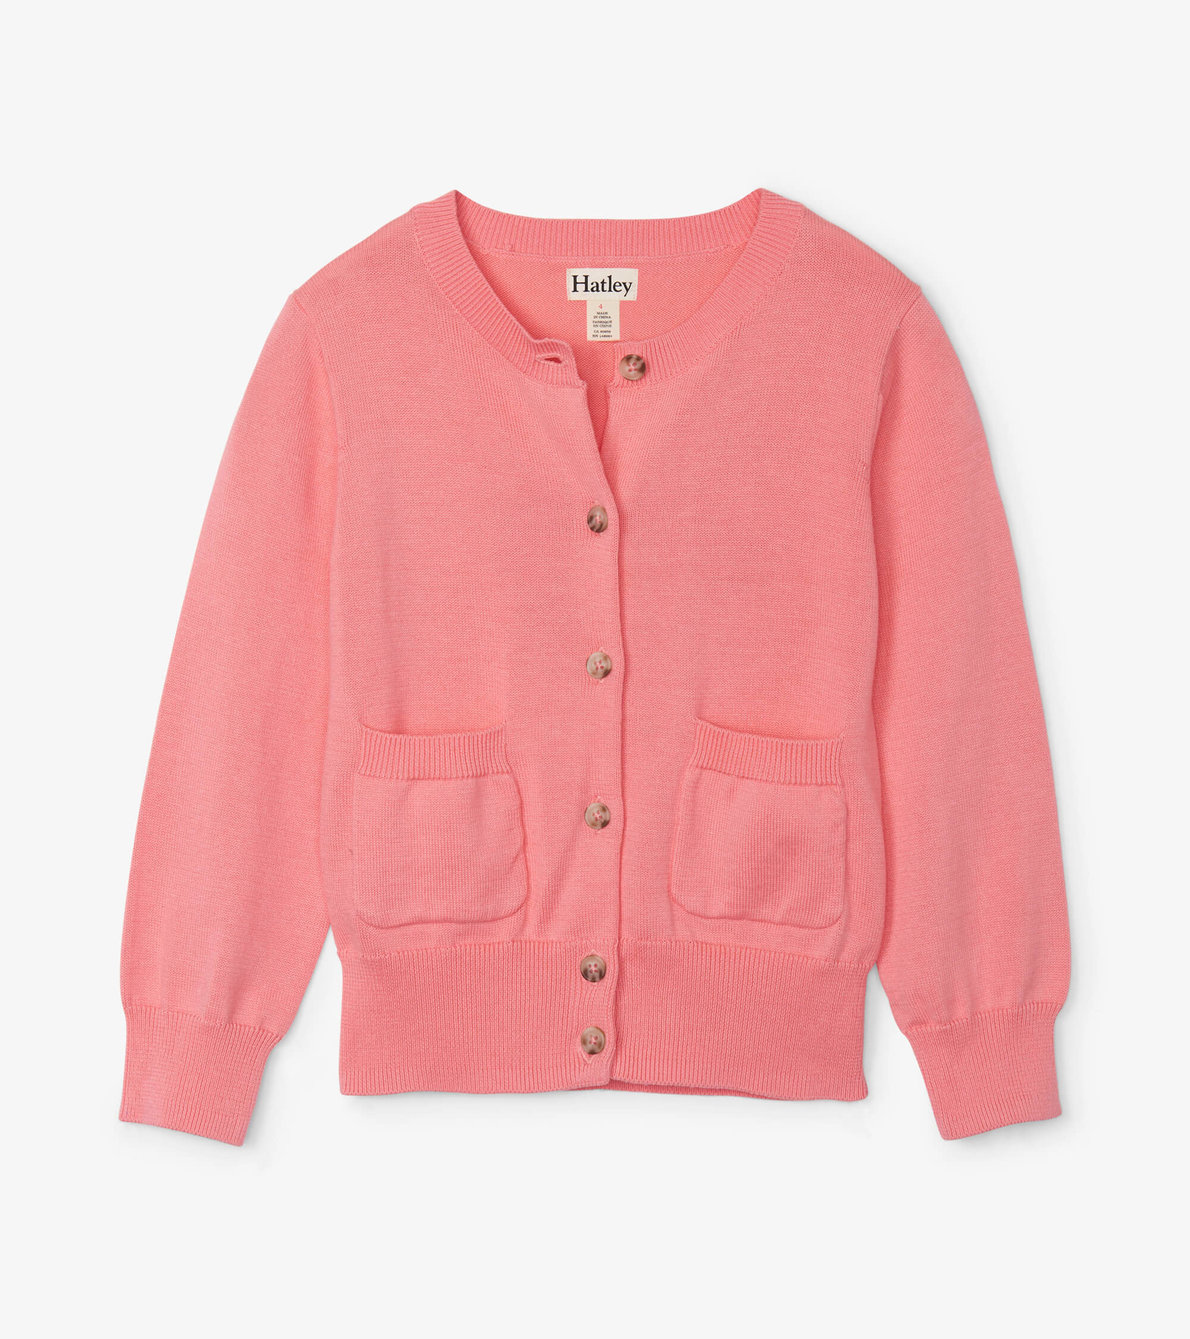 View larger image of Bubble Gum Pink Cardigan